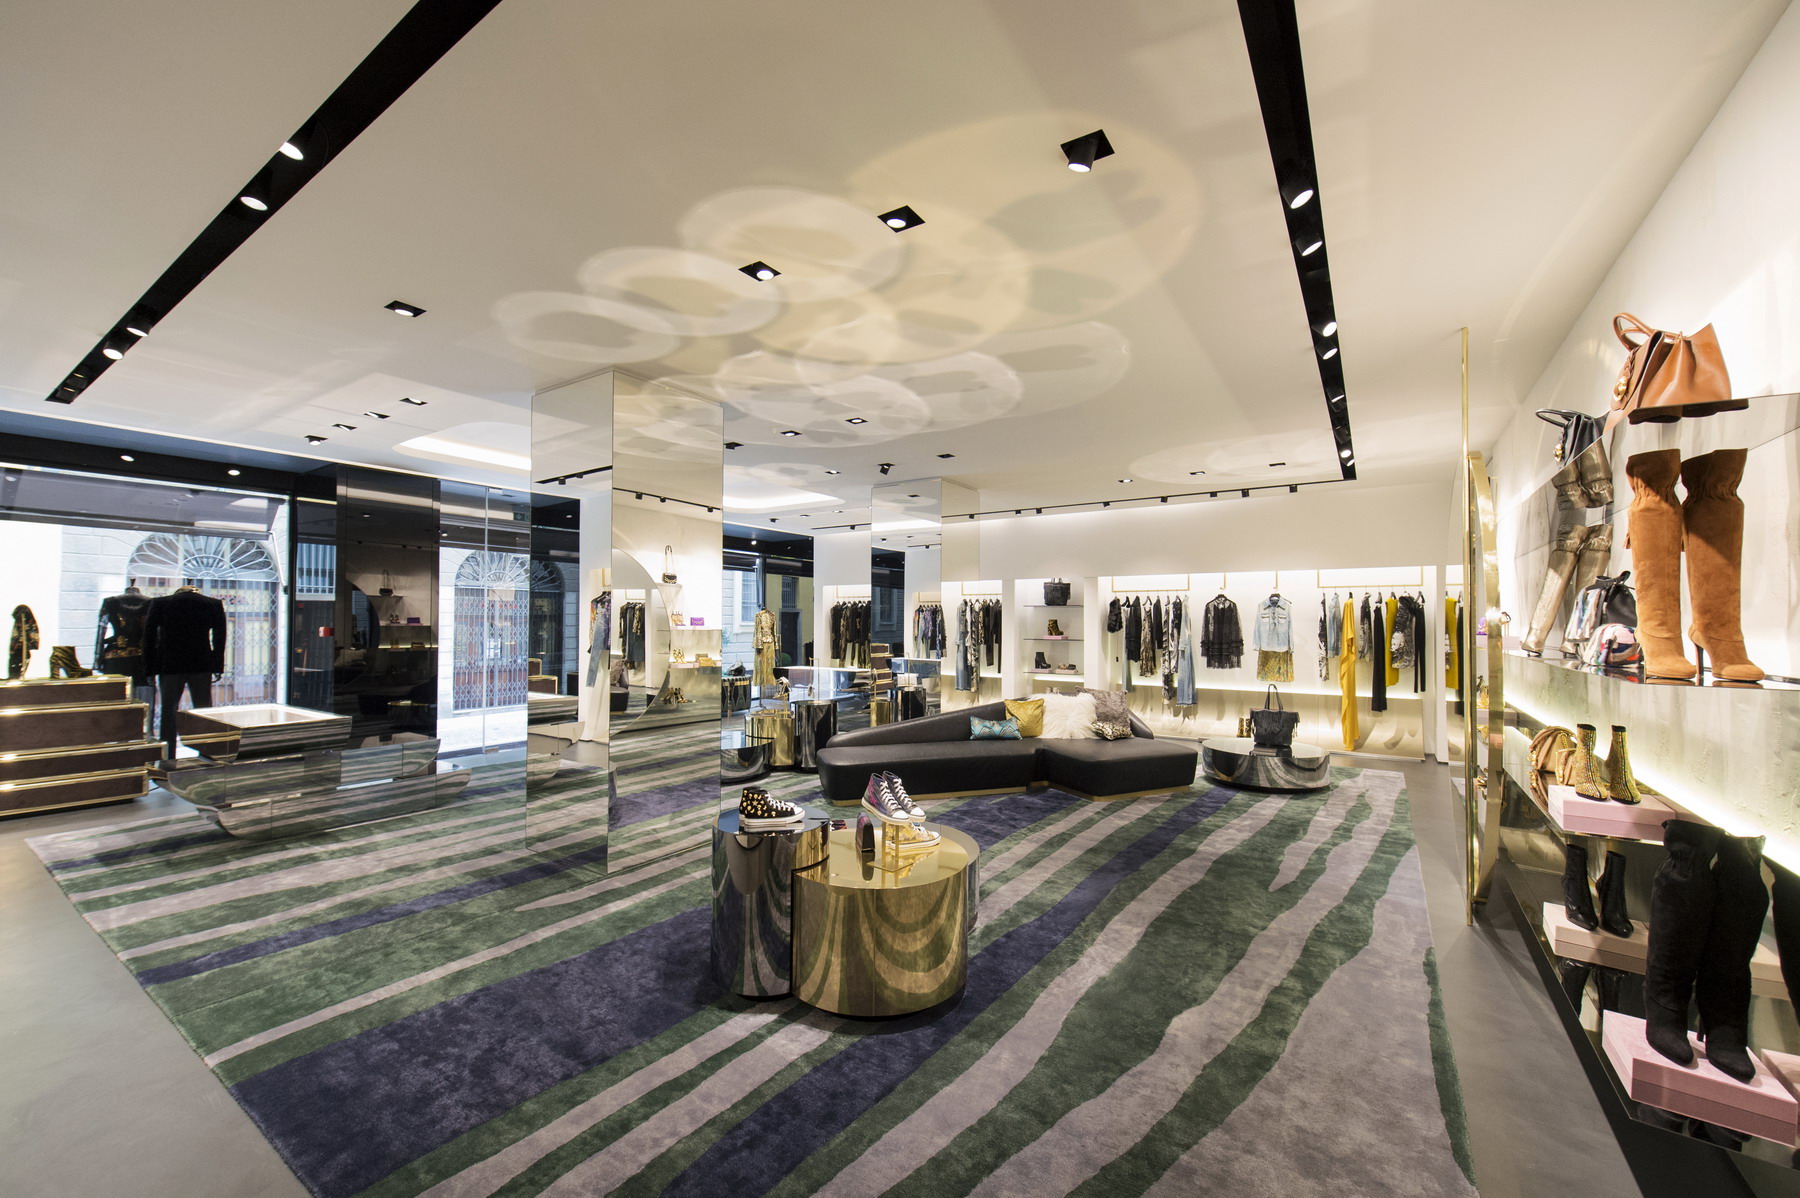 The custom-made rug for a luxury clothing shop